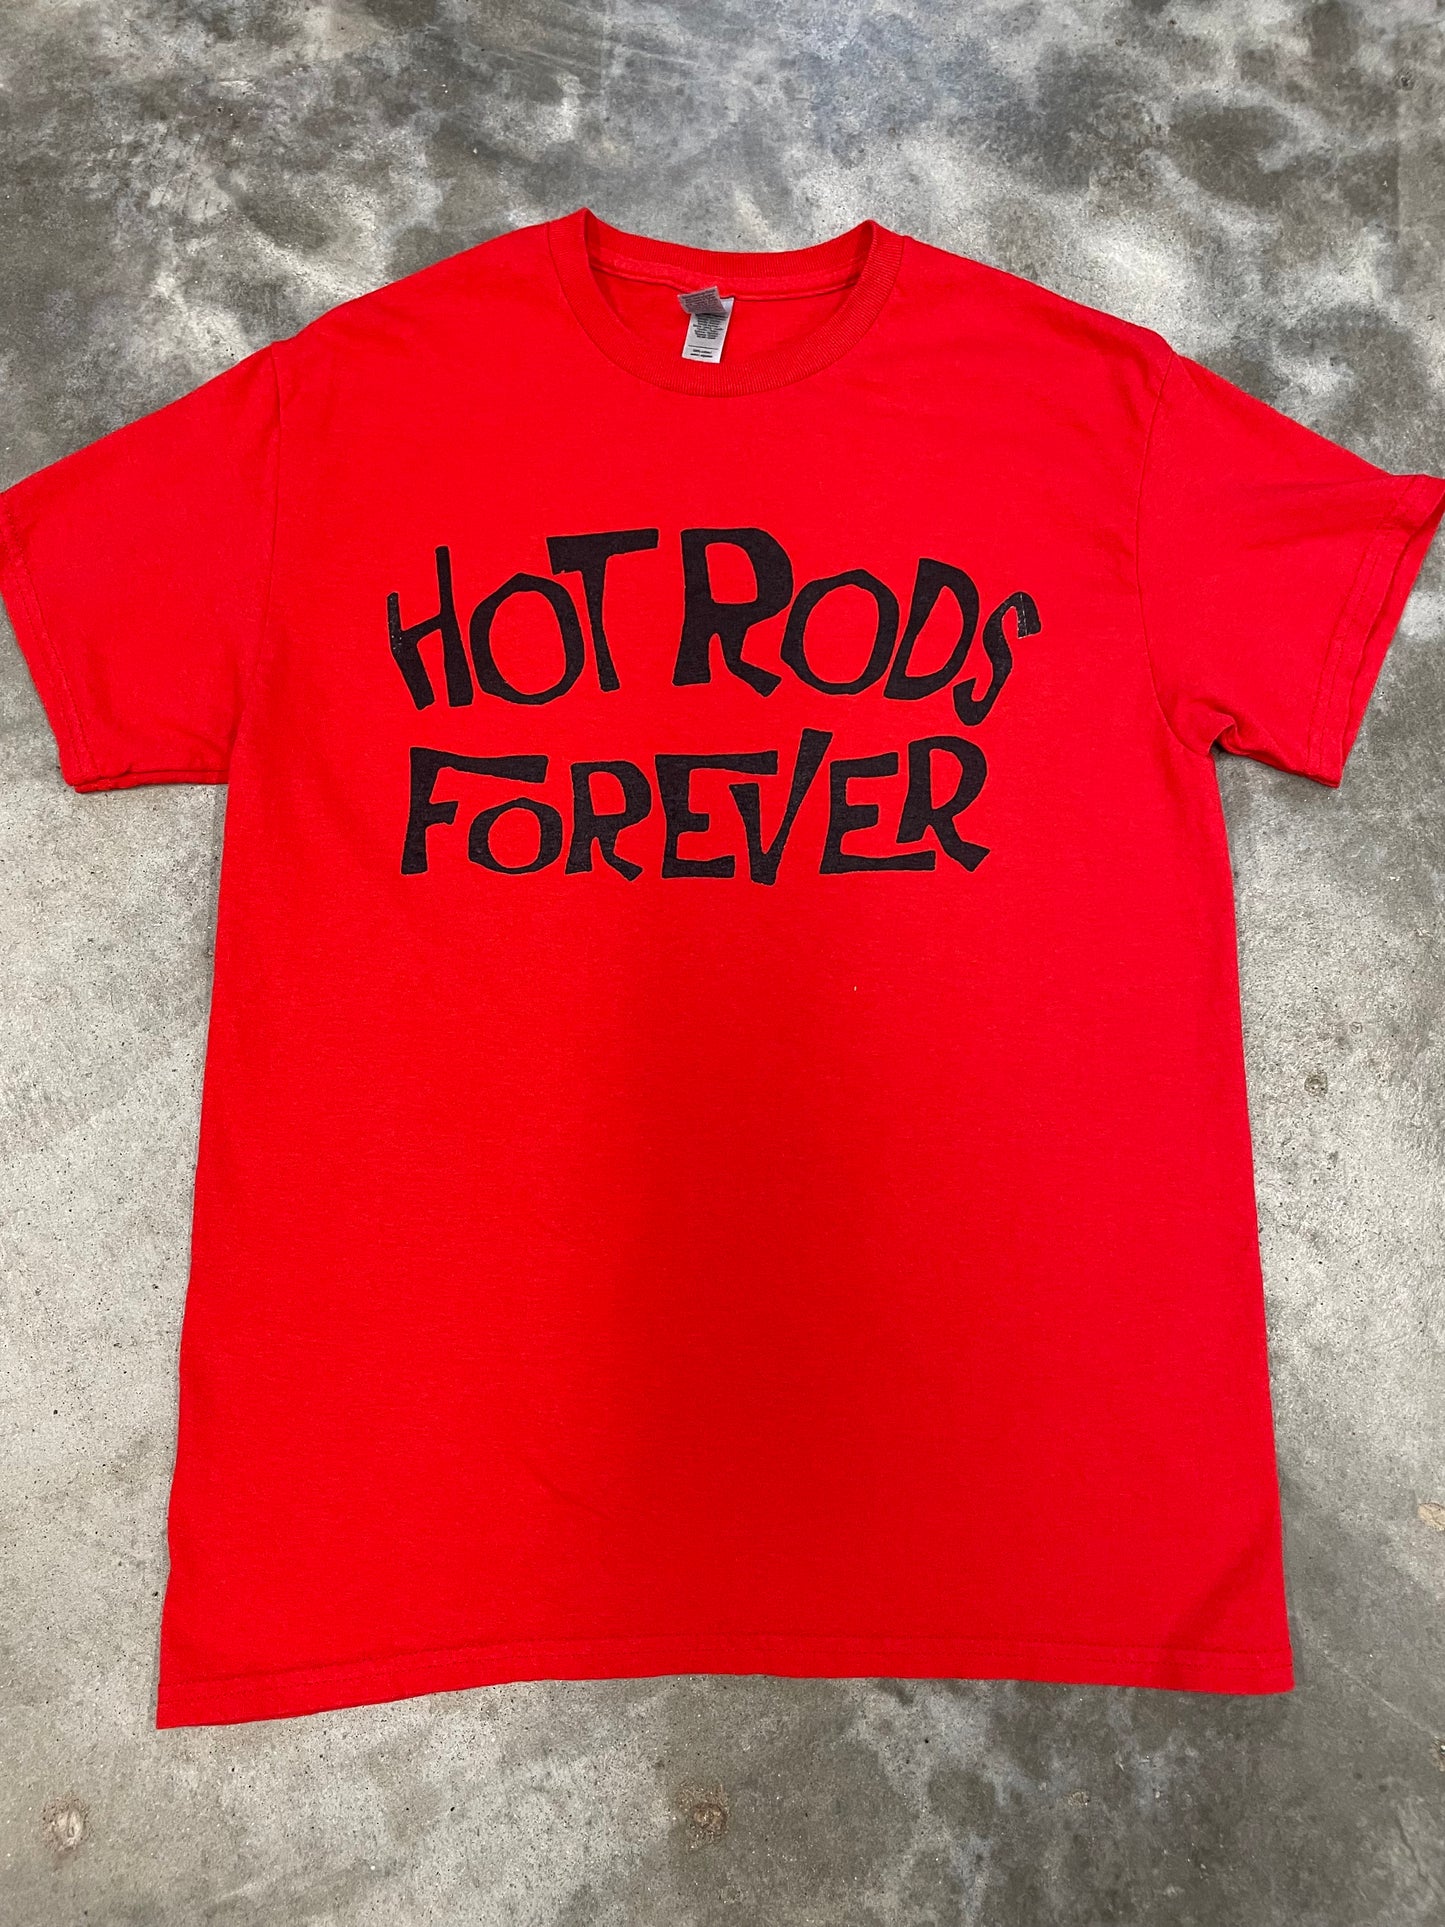 Hot Rods Forever Shirt - Red